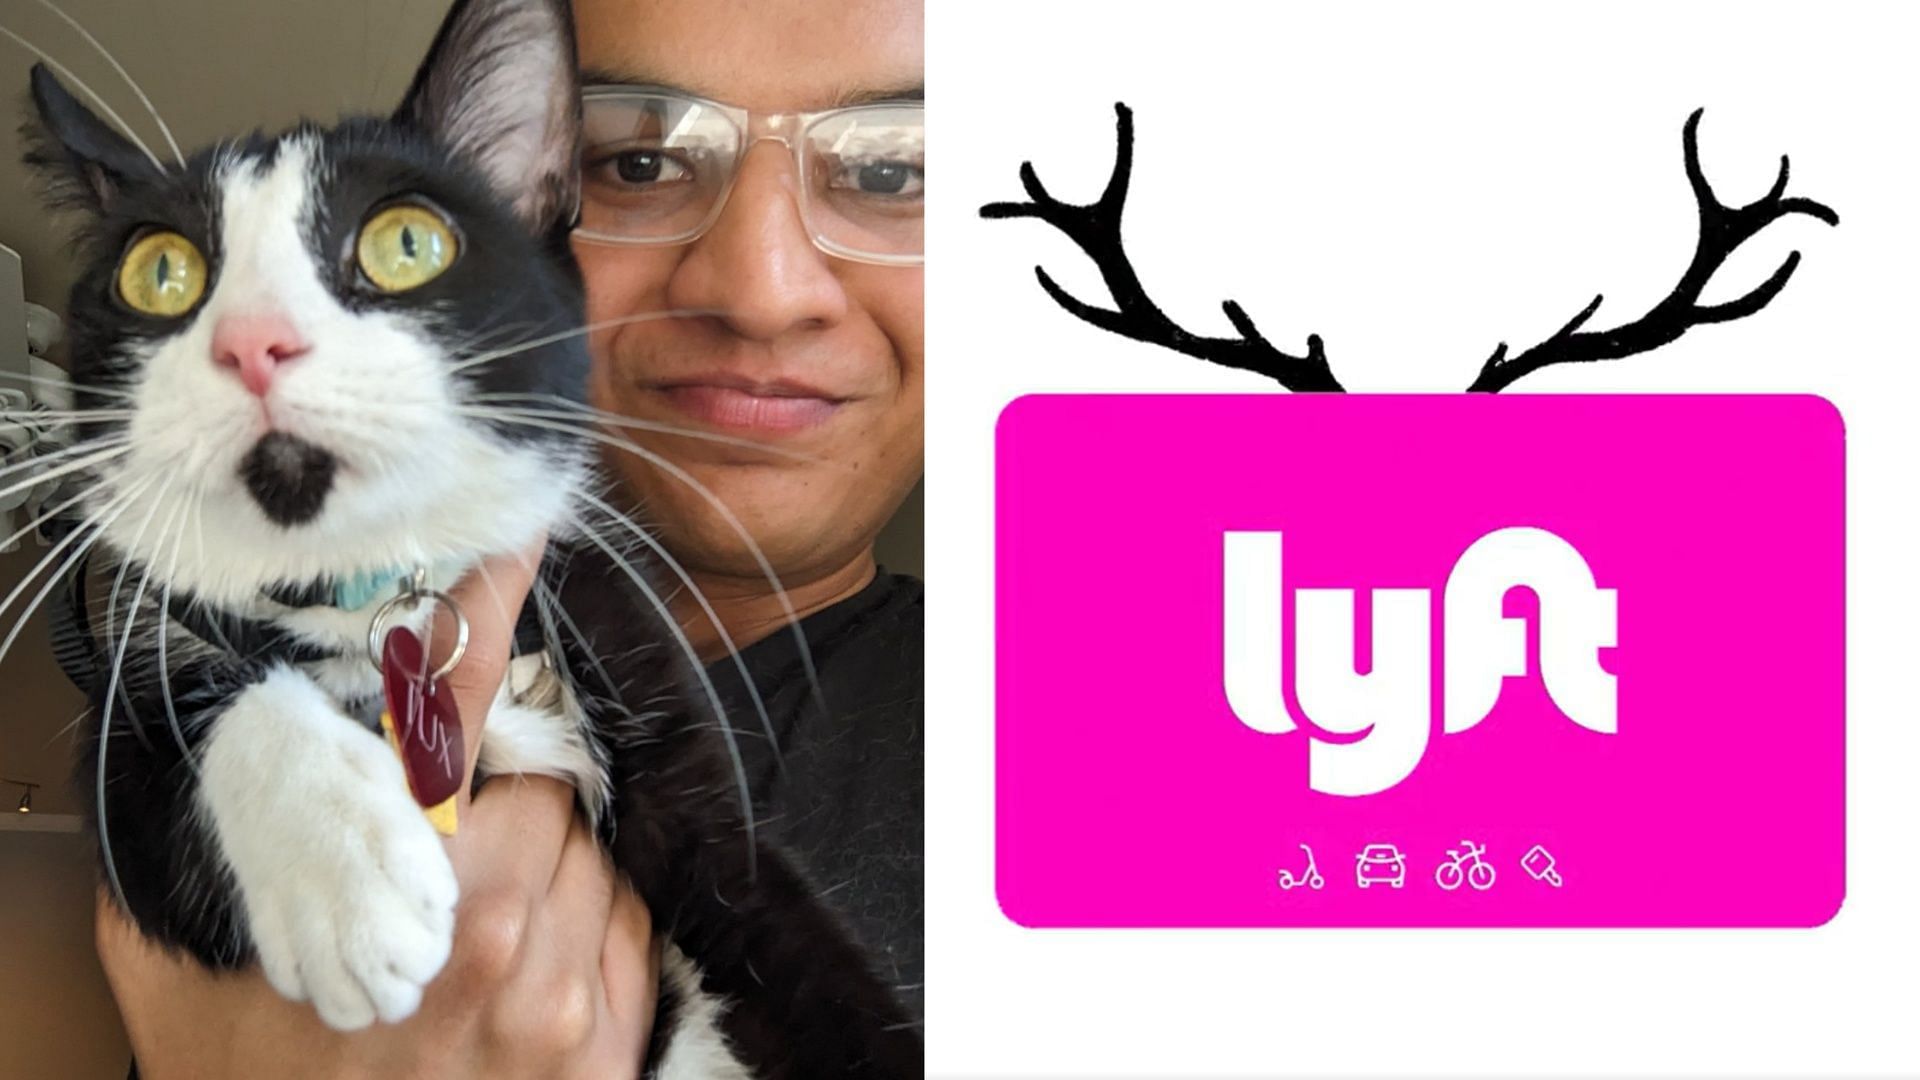 Cat owner reunited with his cat two days after a Lyft driver drover off with the cat still in the vehicle. (Image via X/@palashp40616755, @lyft)